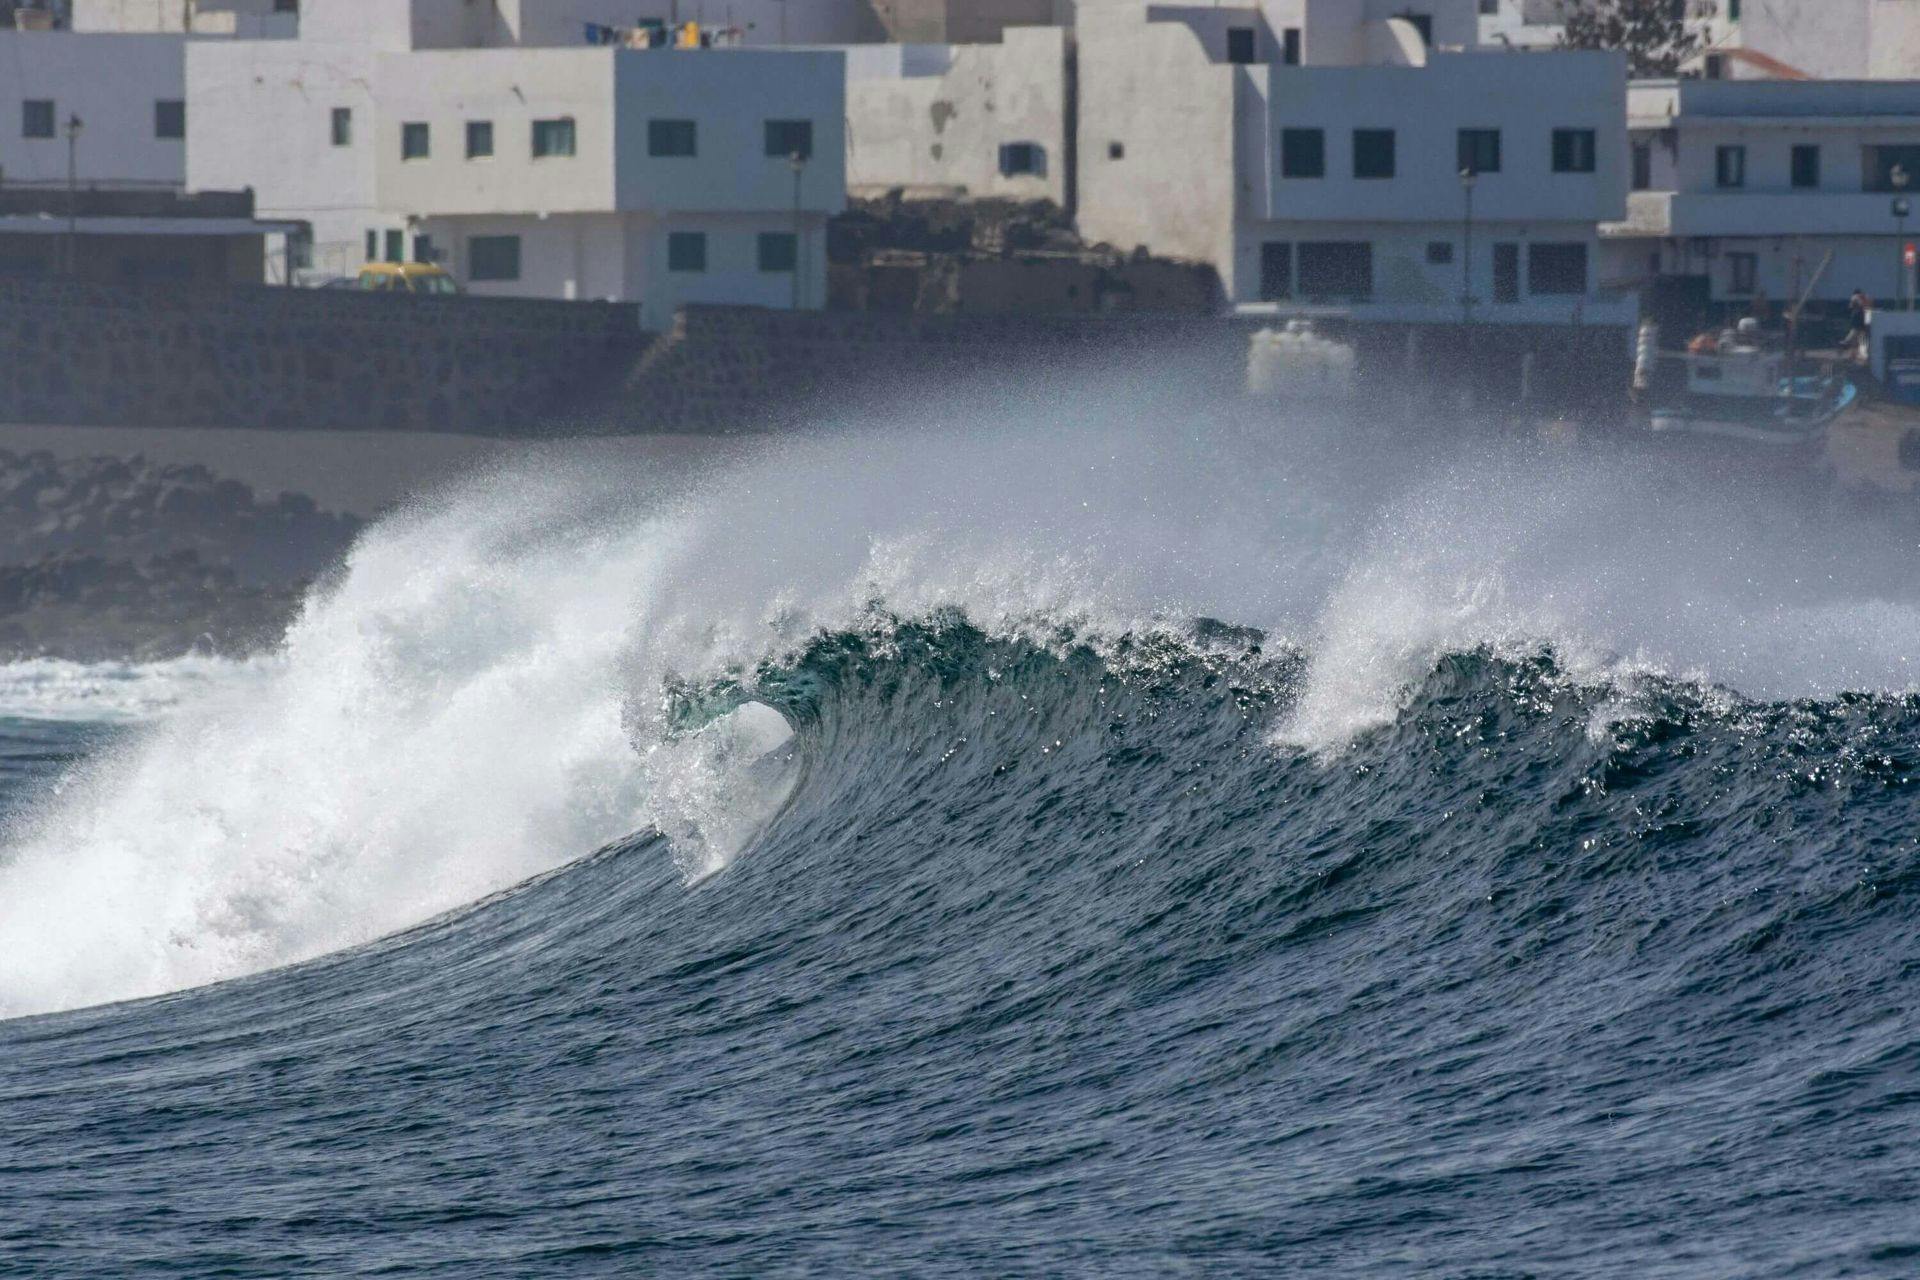 Coworking, Coliving and Surfing in Lanzarote (Spain)